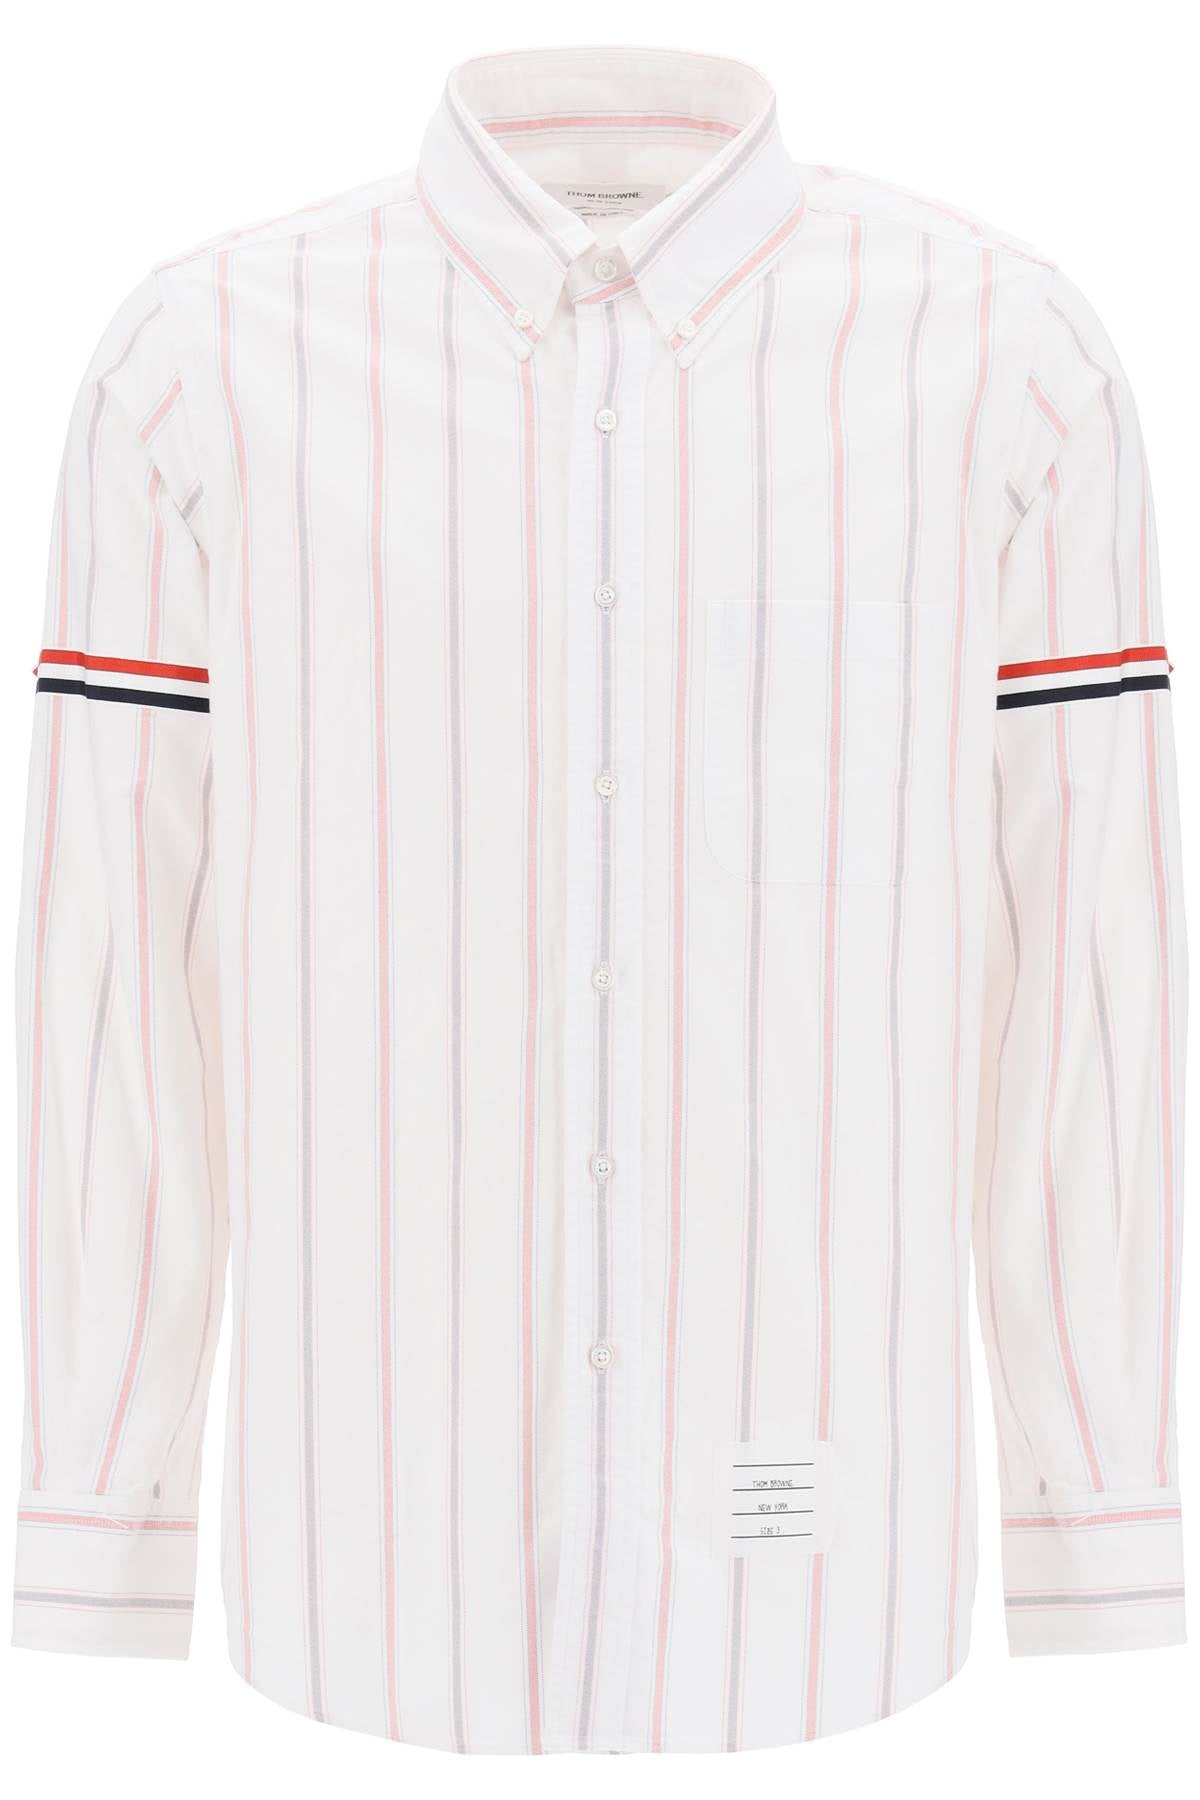 THOM BROWNE STRIPED OXFORD BUTTON DOWN SHIRT WITH ARMBANDS